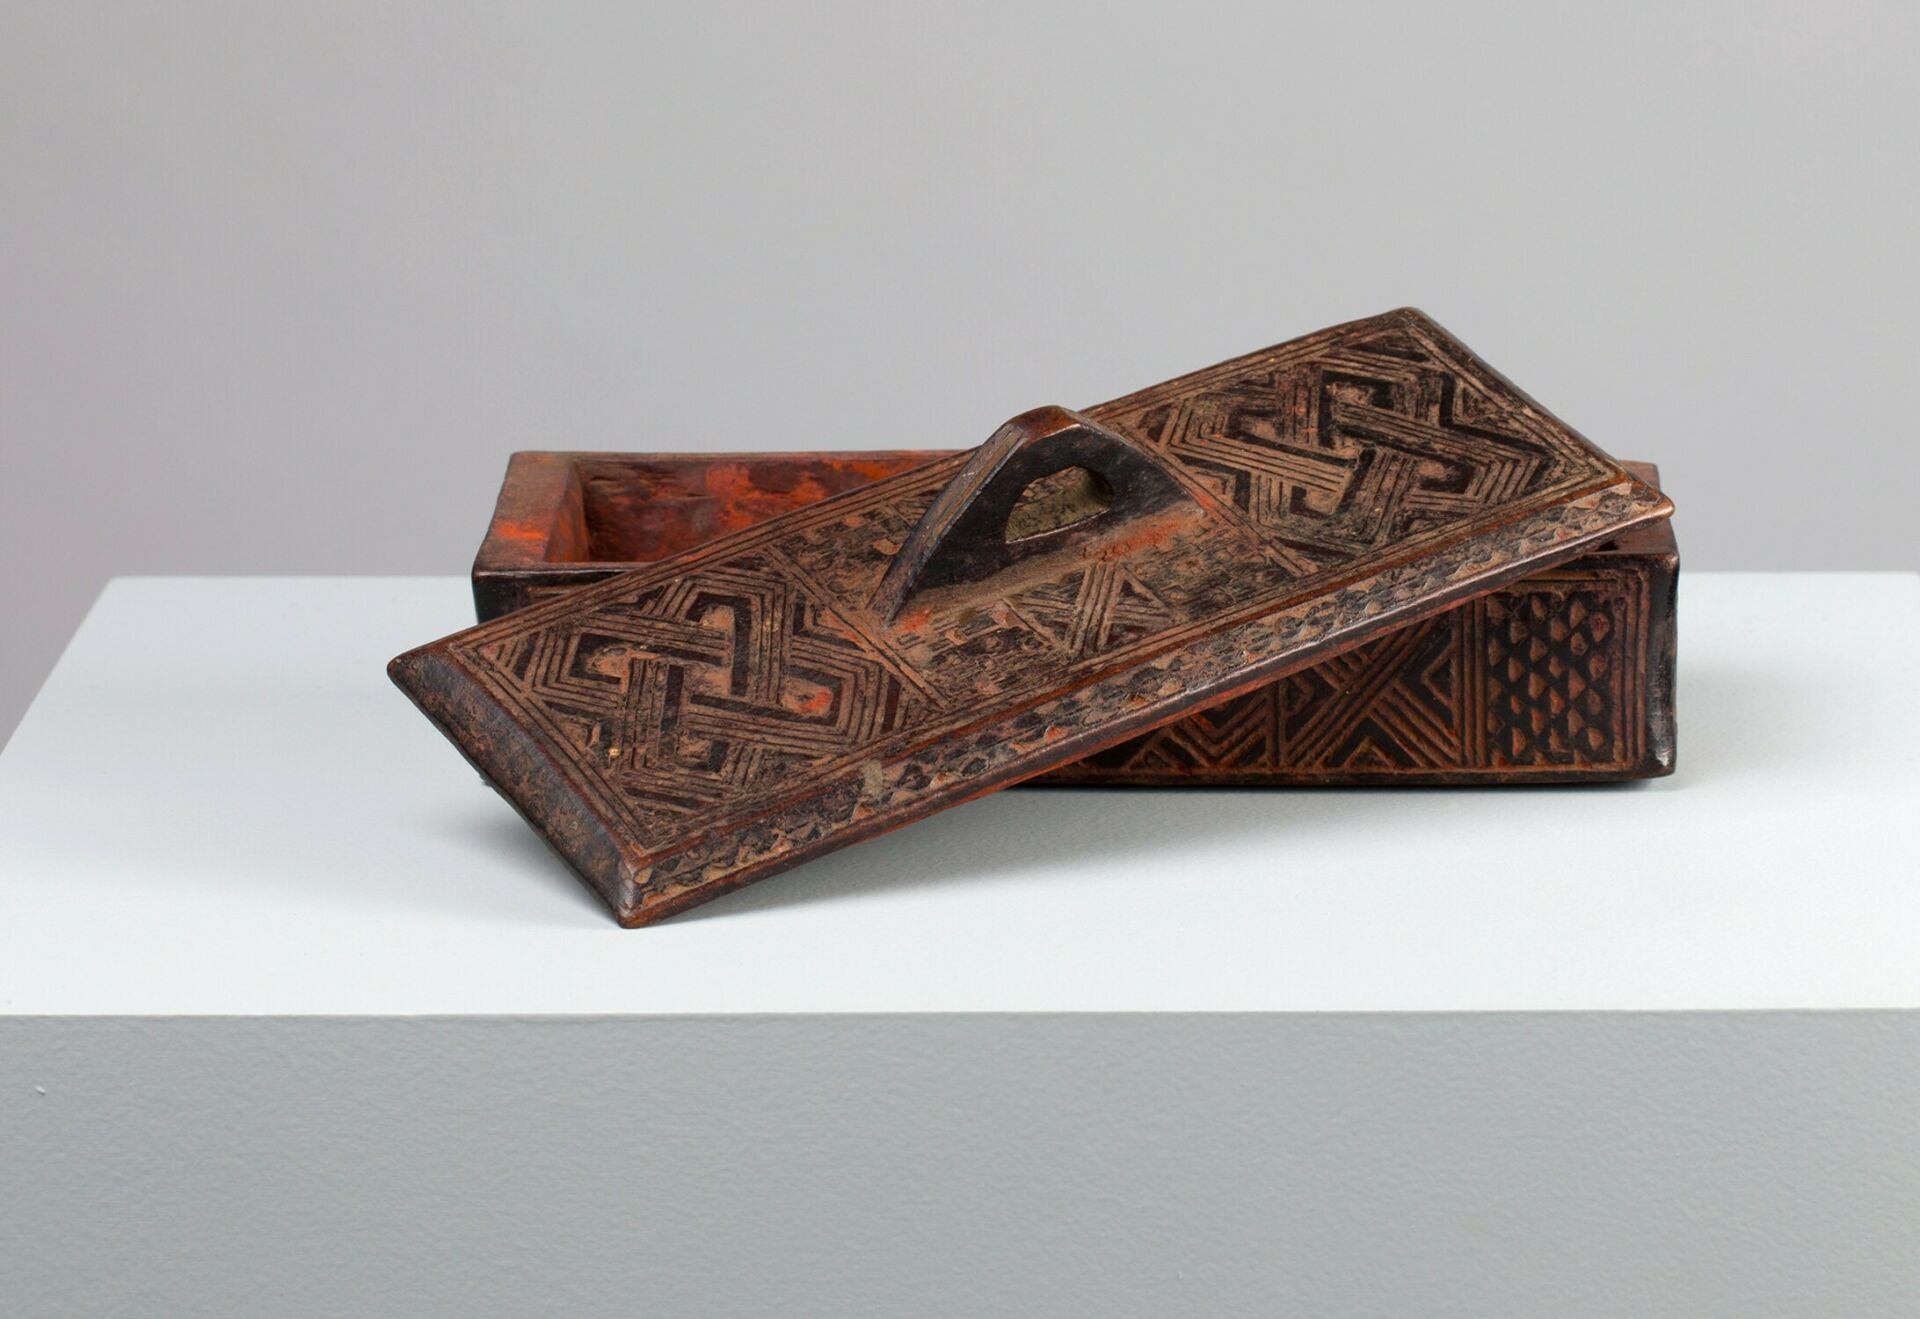 A 20th century decorated wooden box called a Tukula container produced by Kuba carvers from the Democratic Rebublic of the Congo.